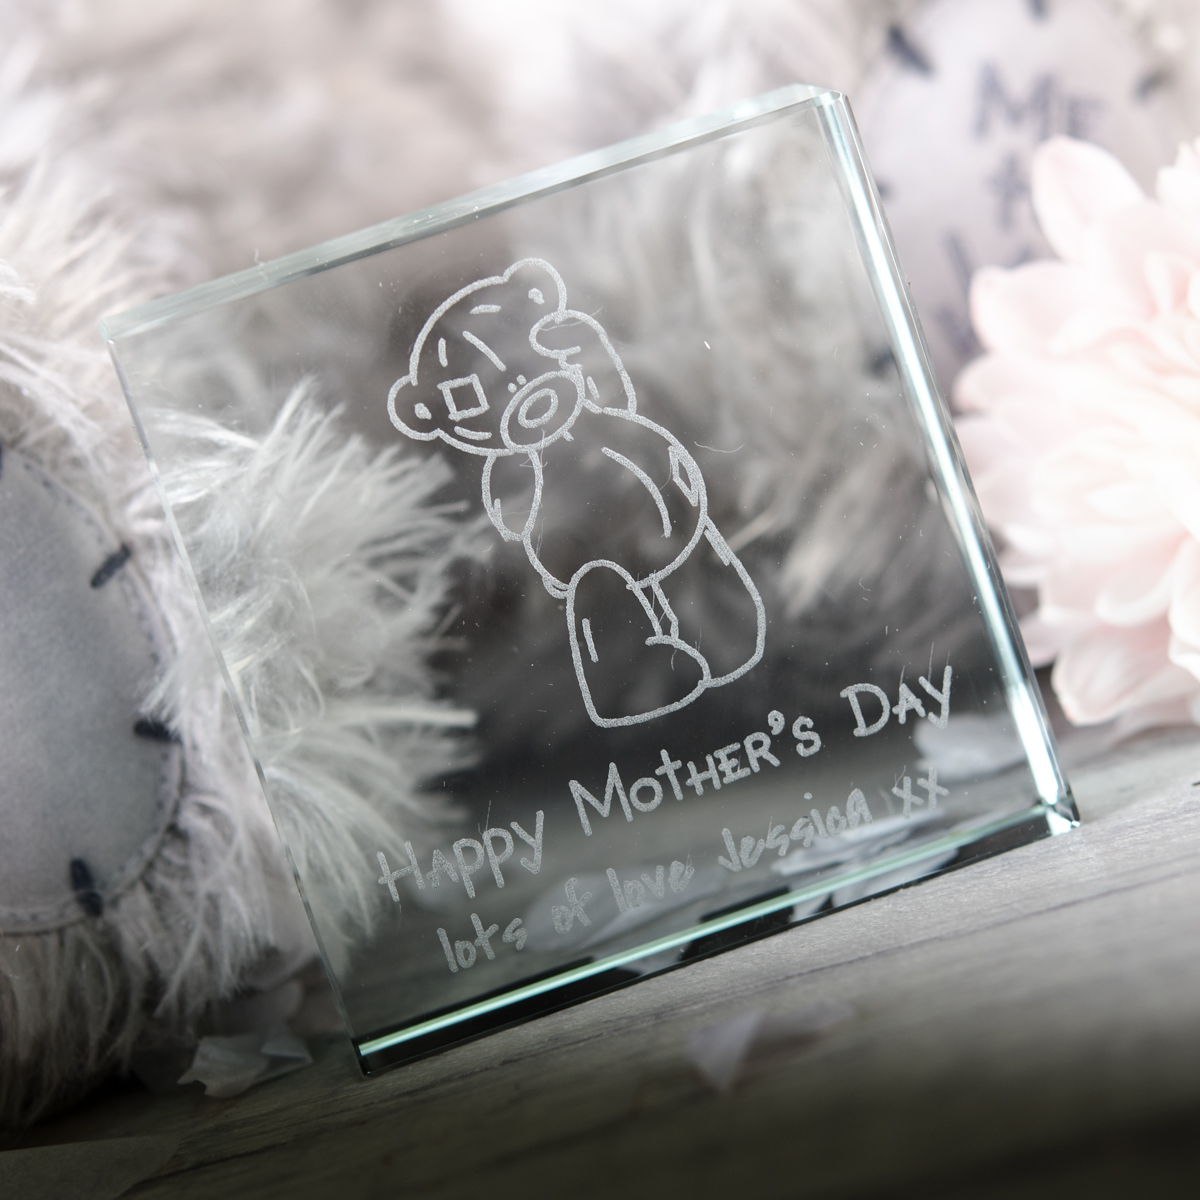 Personalised Me To You Glass Token - Happy Mothers Day